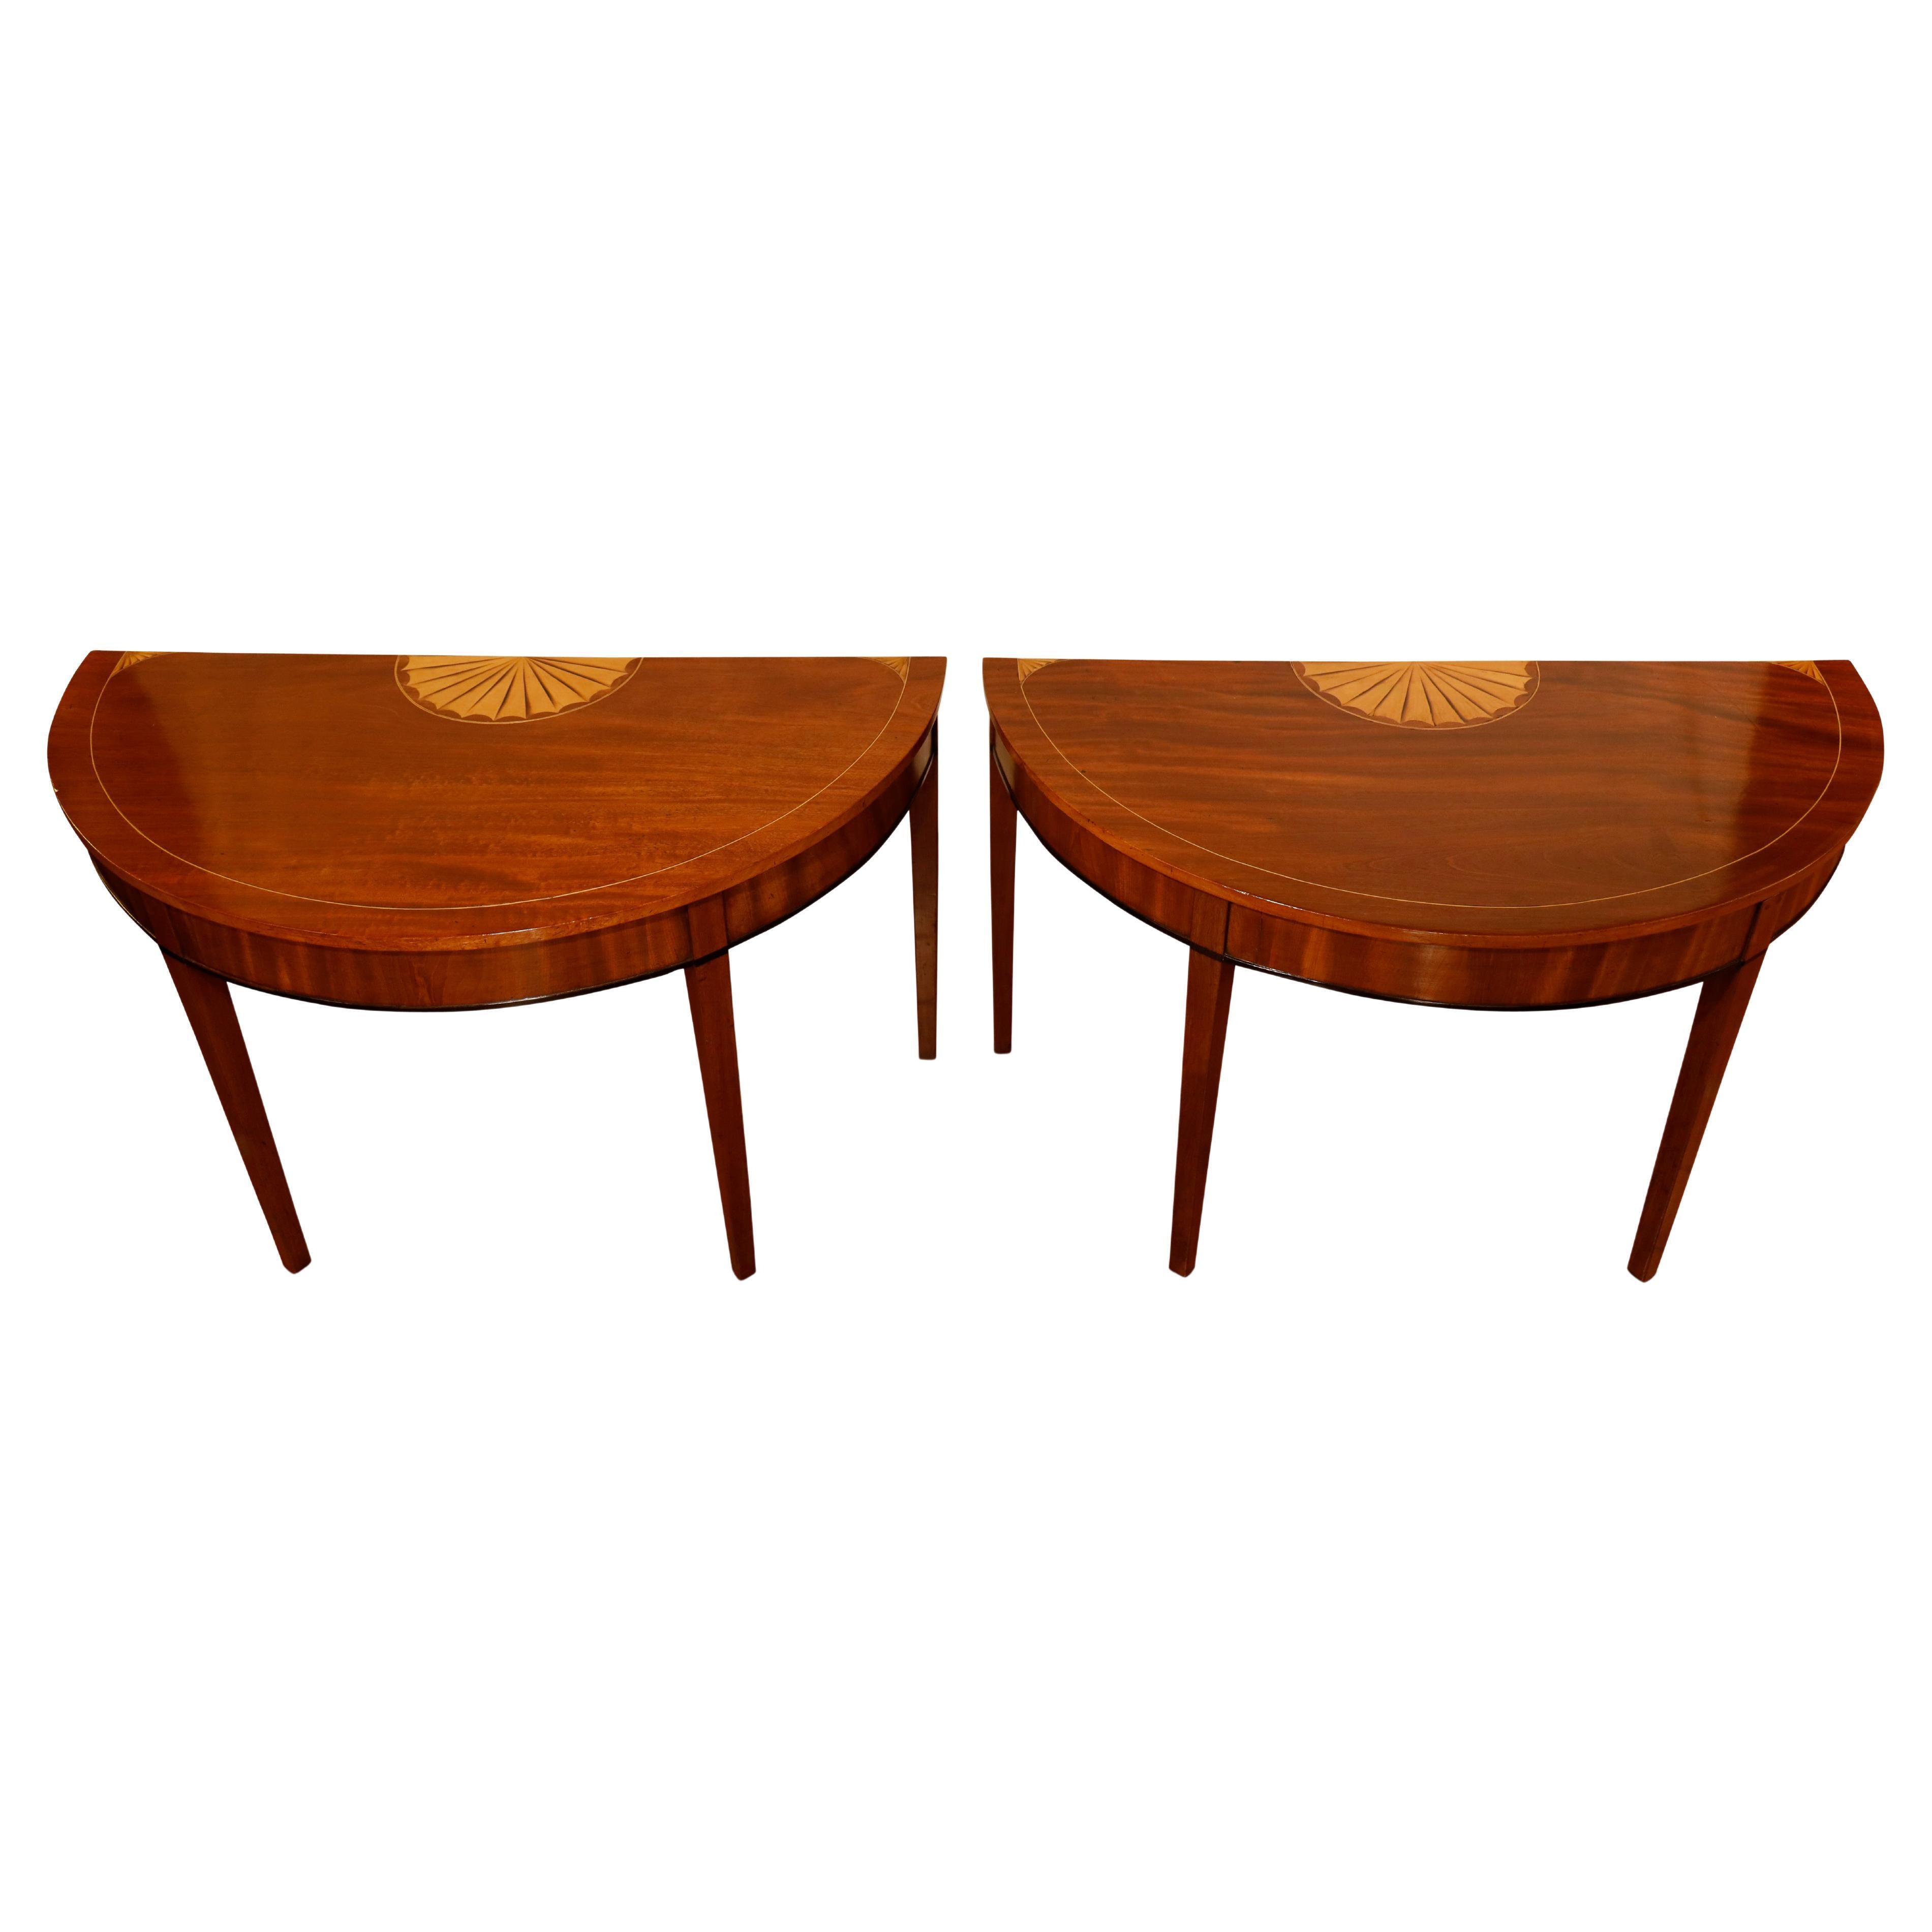 Pair of George III Demilune Tables